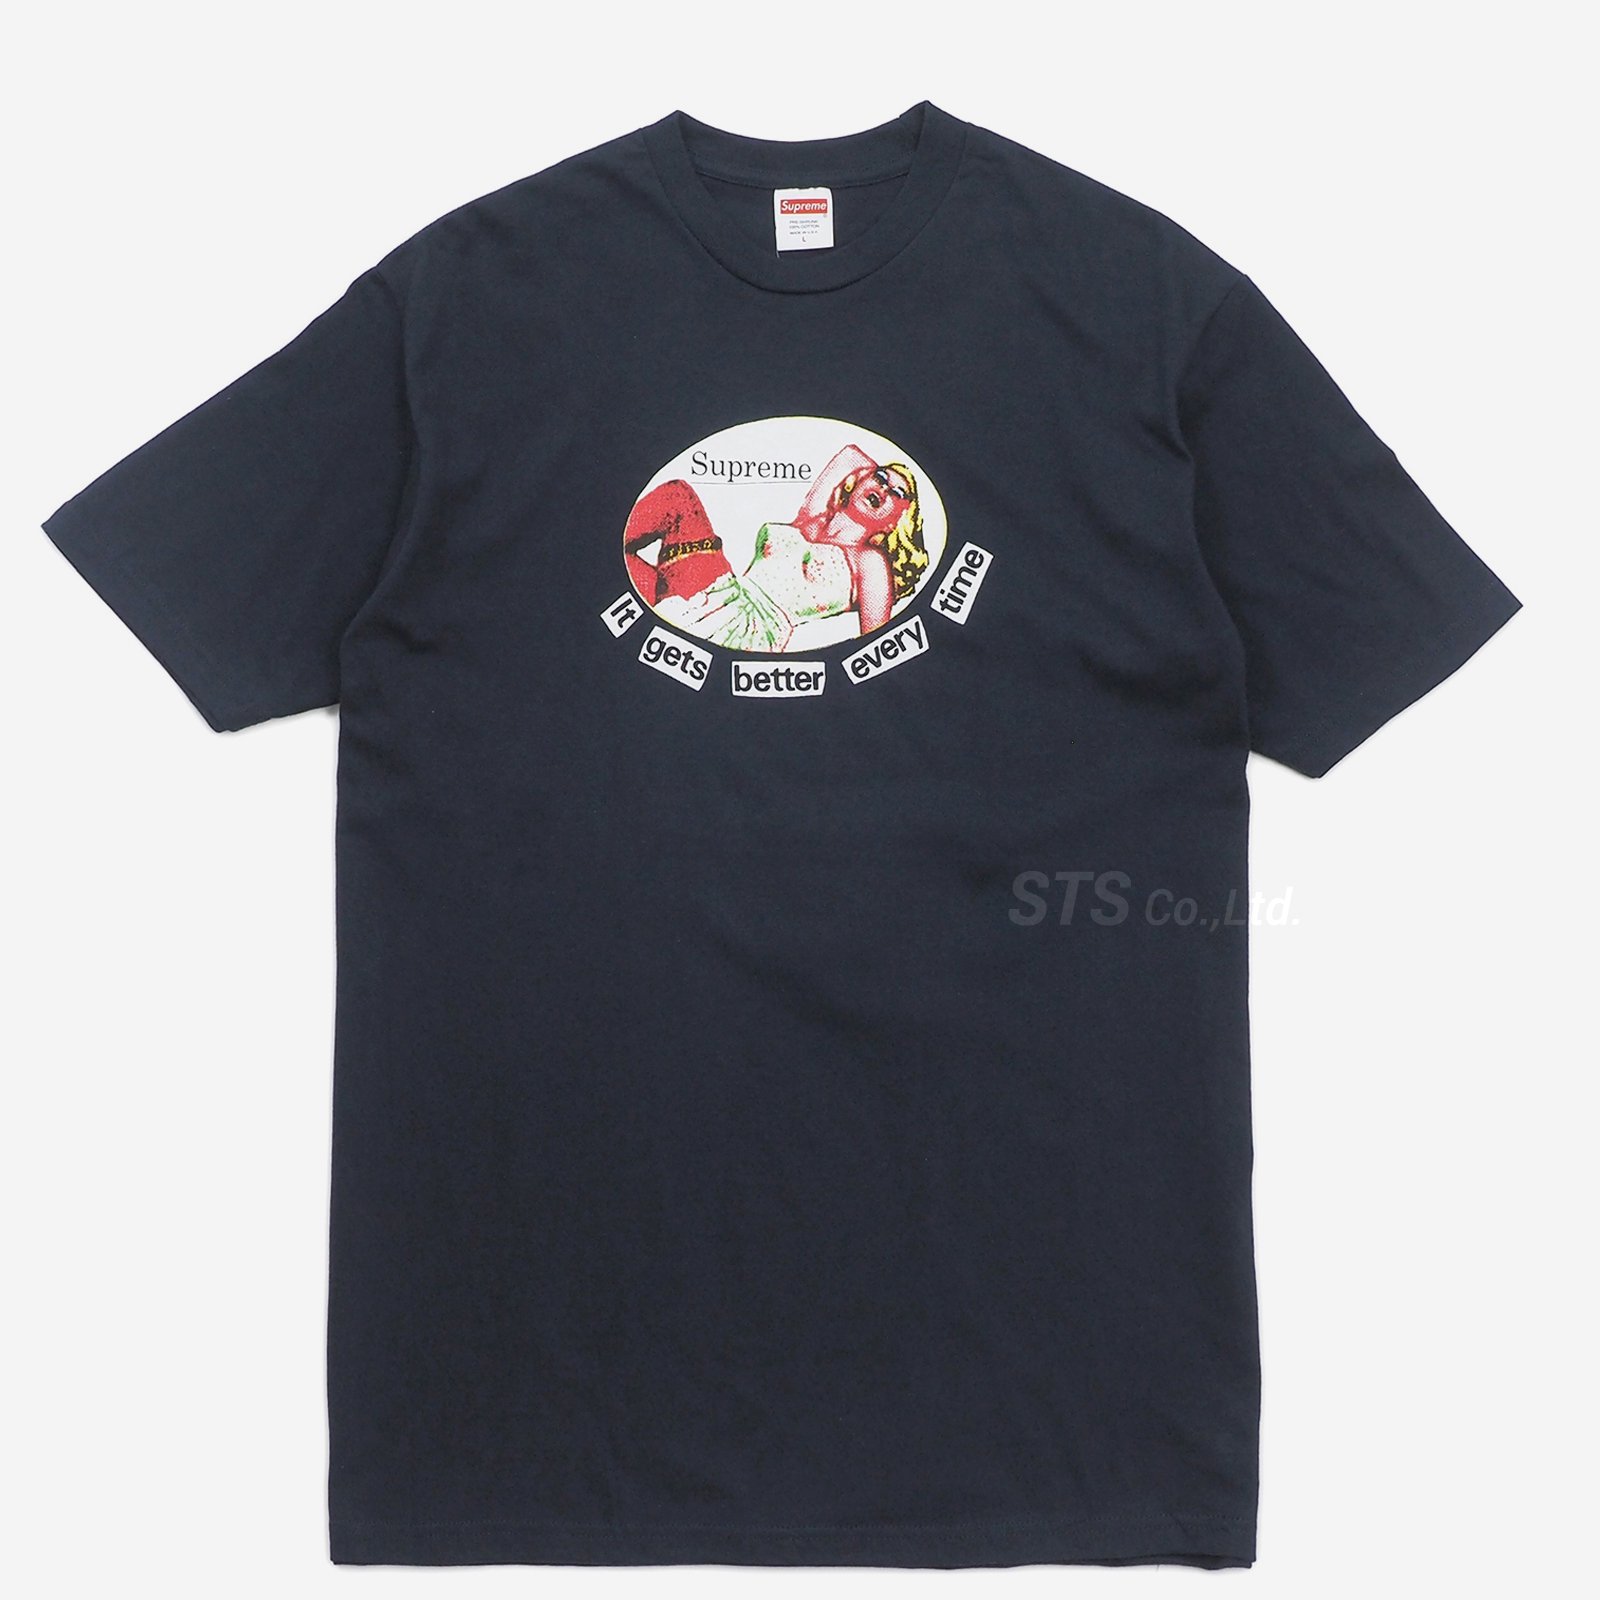 Supreme - It Gets Better Every Time Tee - ParkSIDER